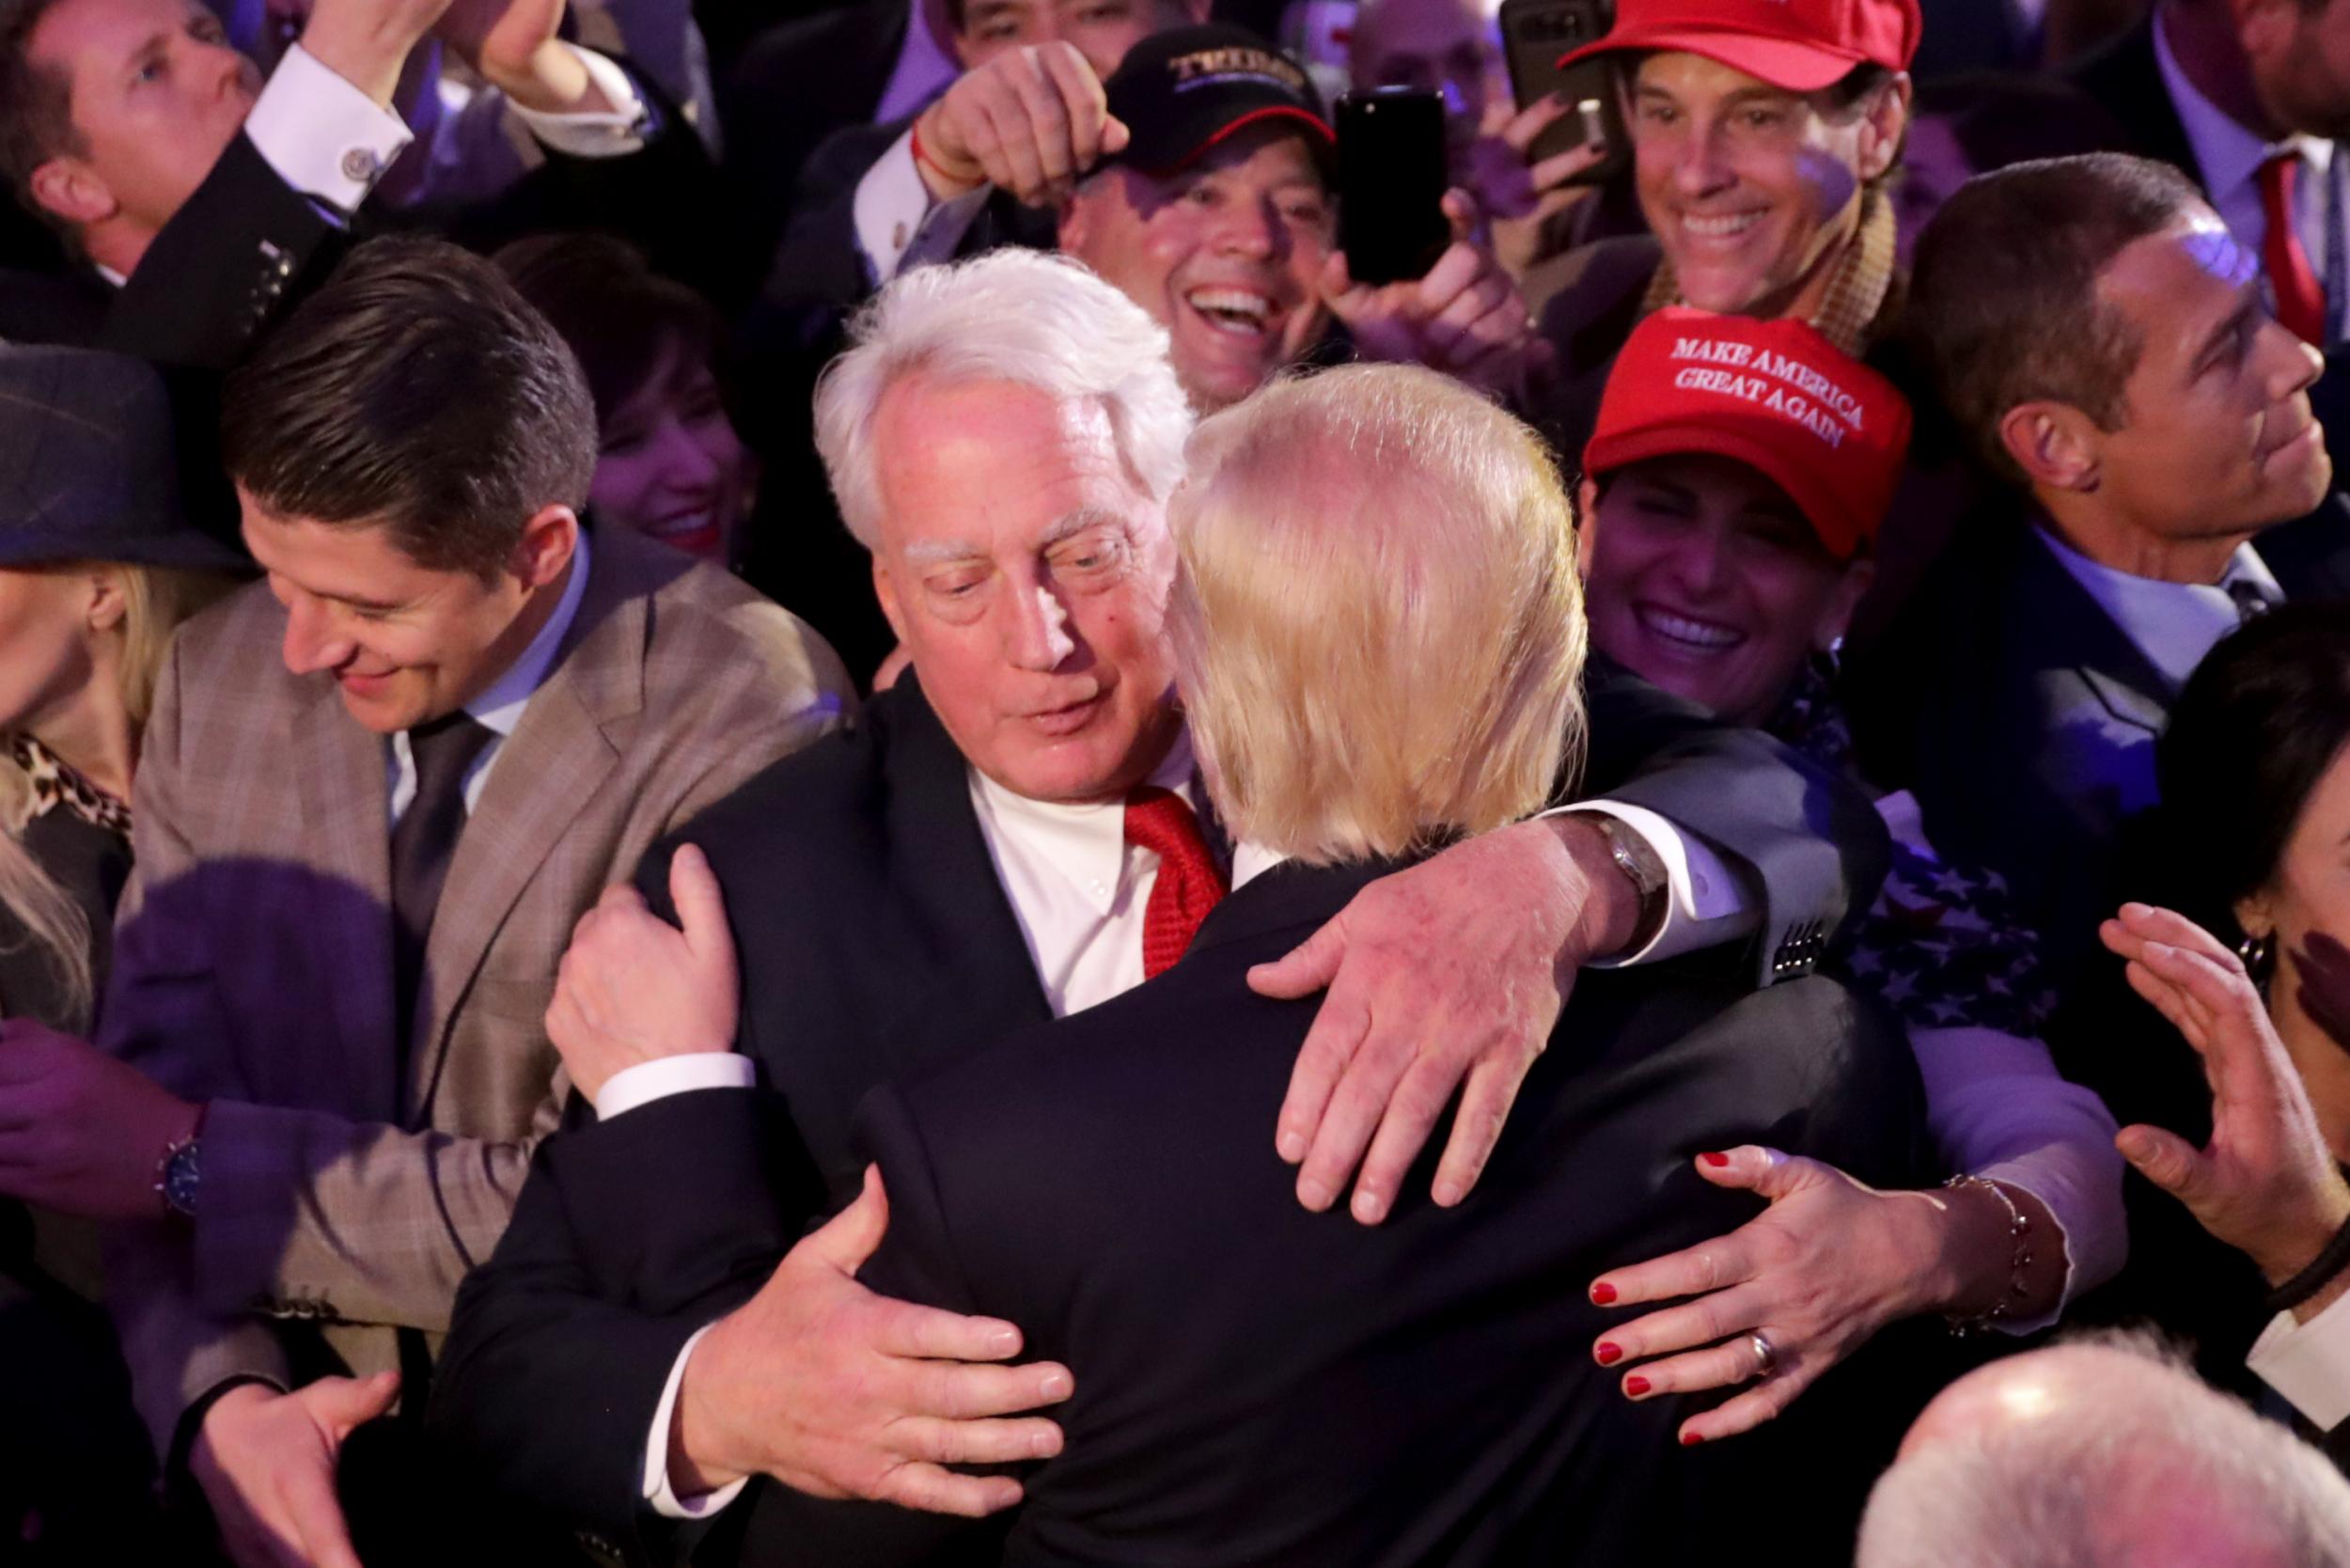 Robert hugs Donald Trump at the president-elect’s victory celebrations in 2016